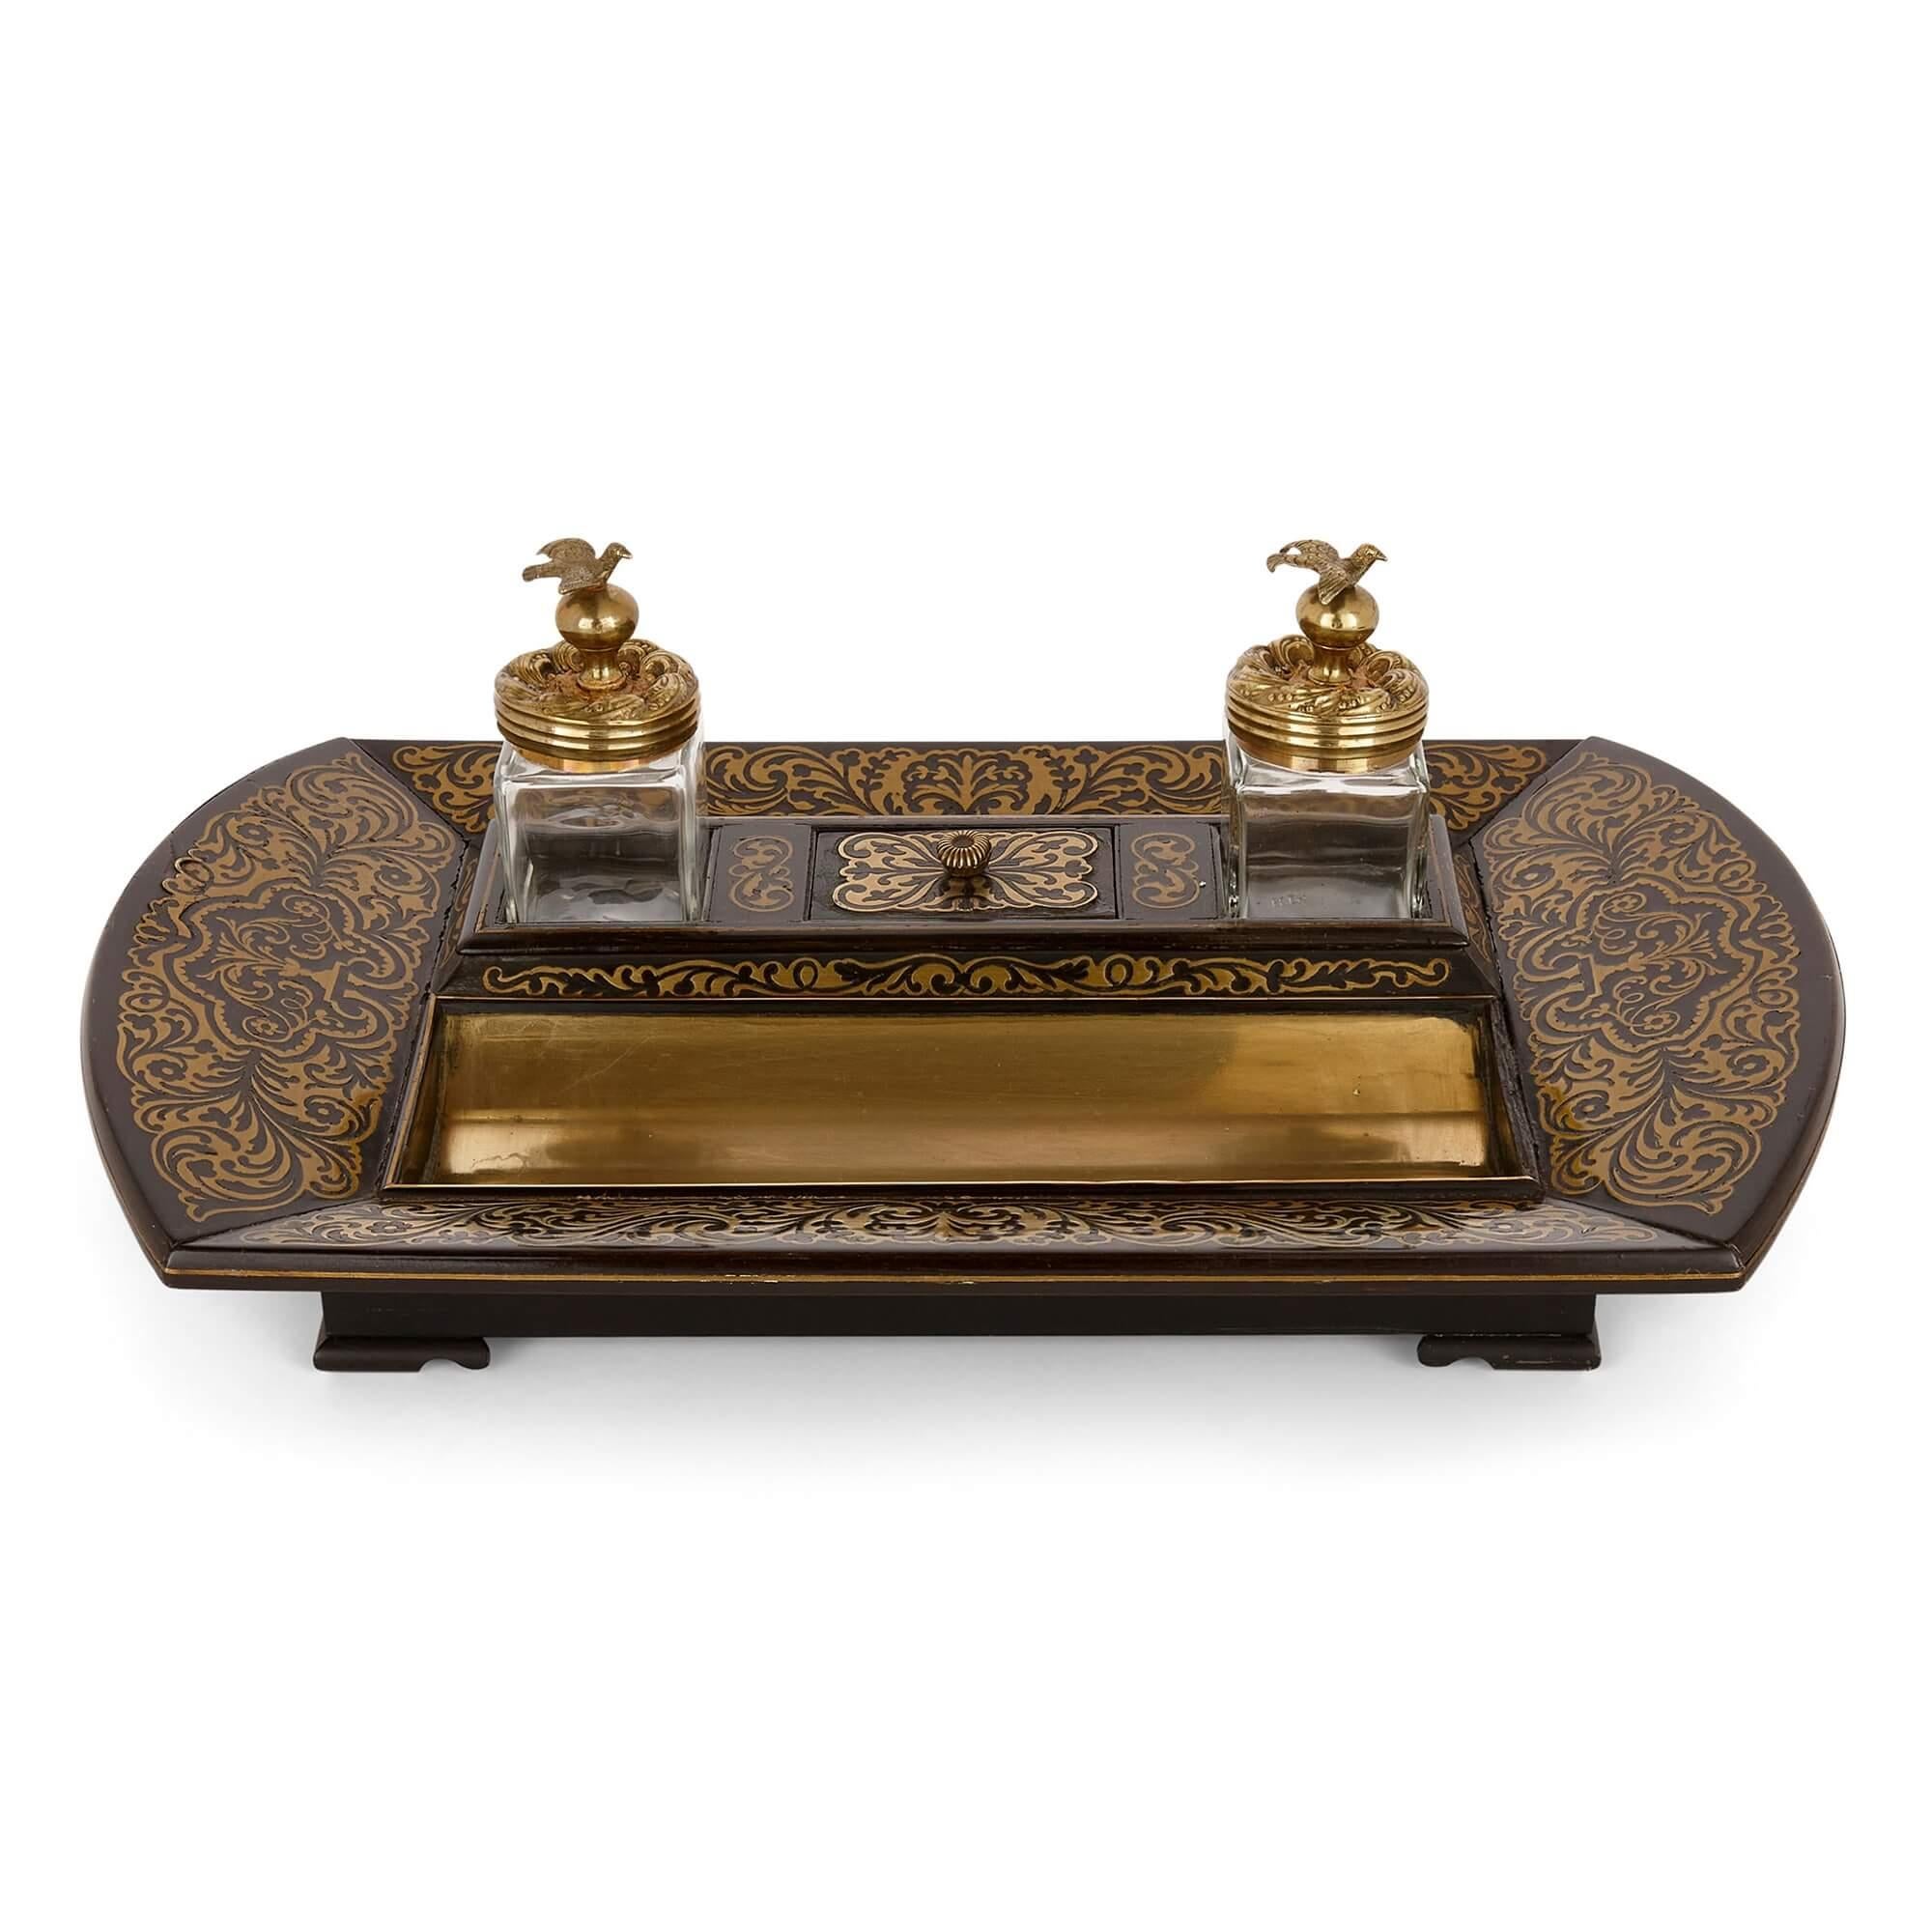 Victorian brass inlaid ebonised wood Boulle inkstand
English, 19th century
Measures: height 12.5cm, width 38cm, depth 23.5cm

Made from ebonised wood and inlaid with brass in the manner of the Boulle marquetry technique, this beautiful piece is